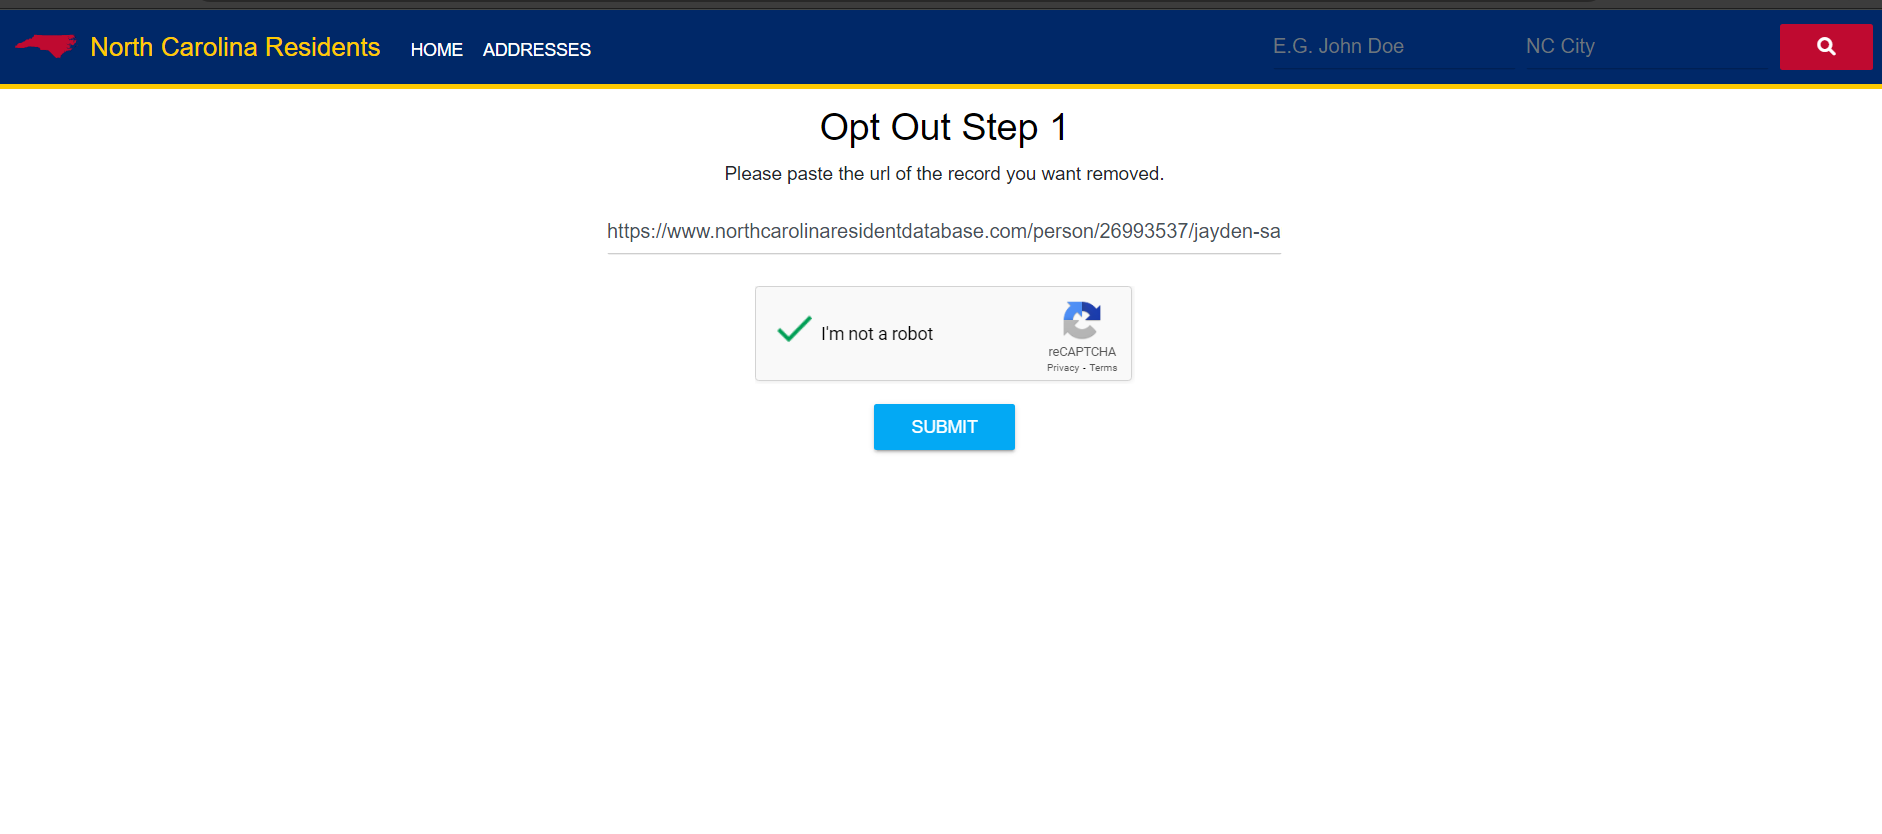 Head to the opt-out page